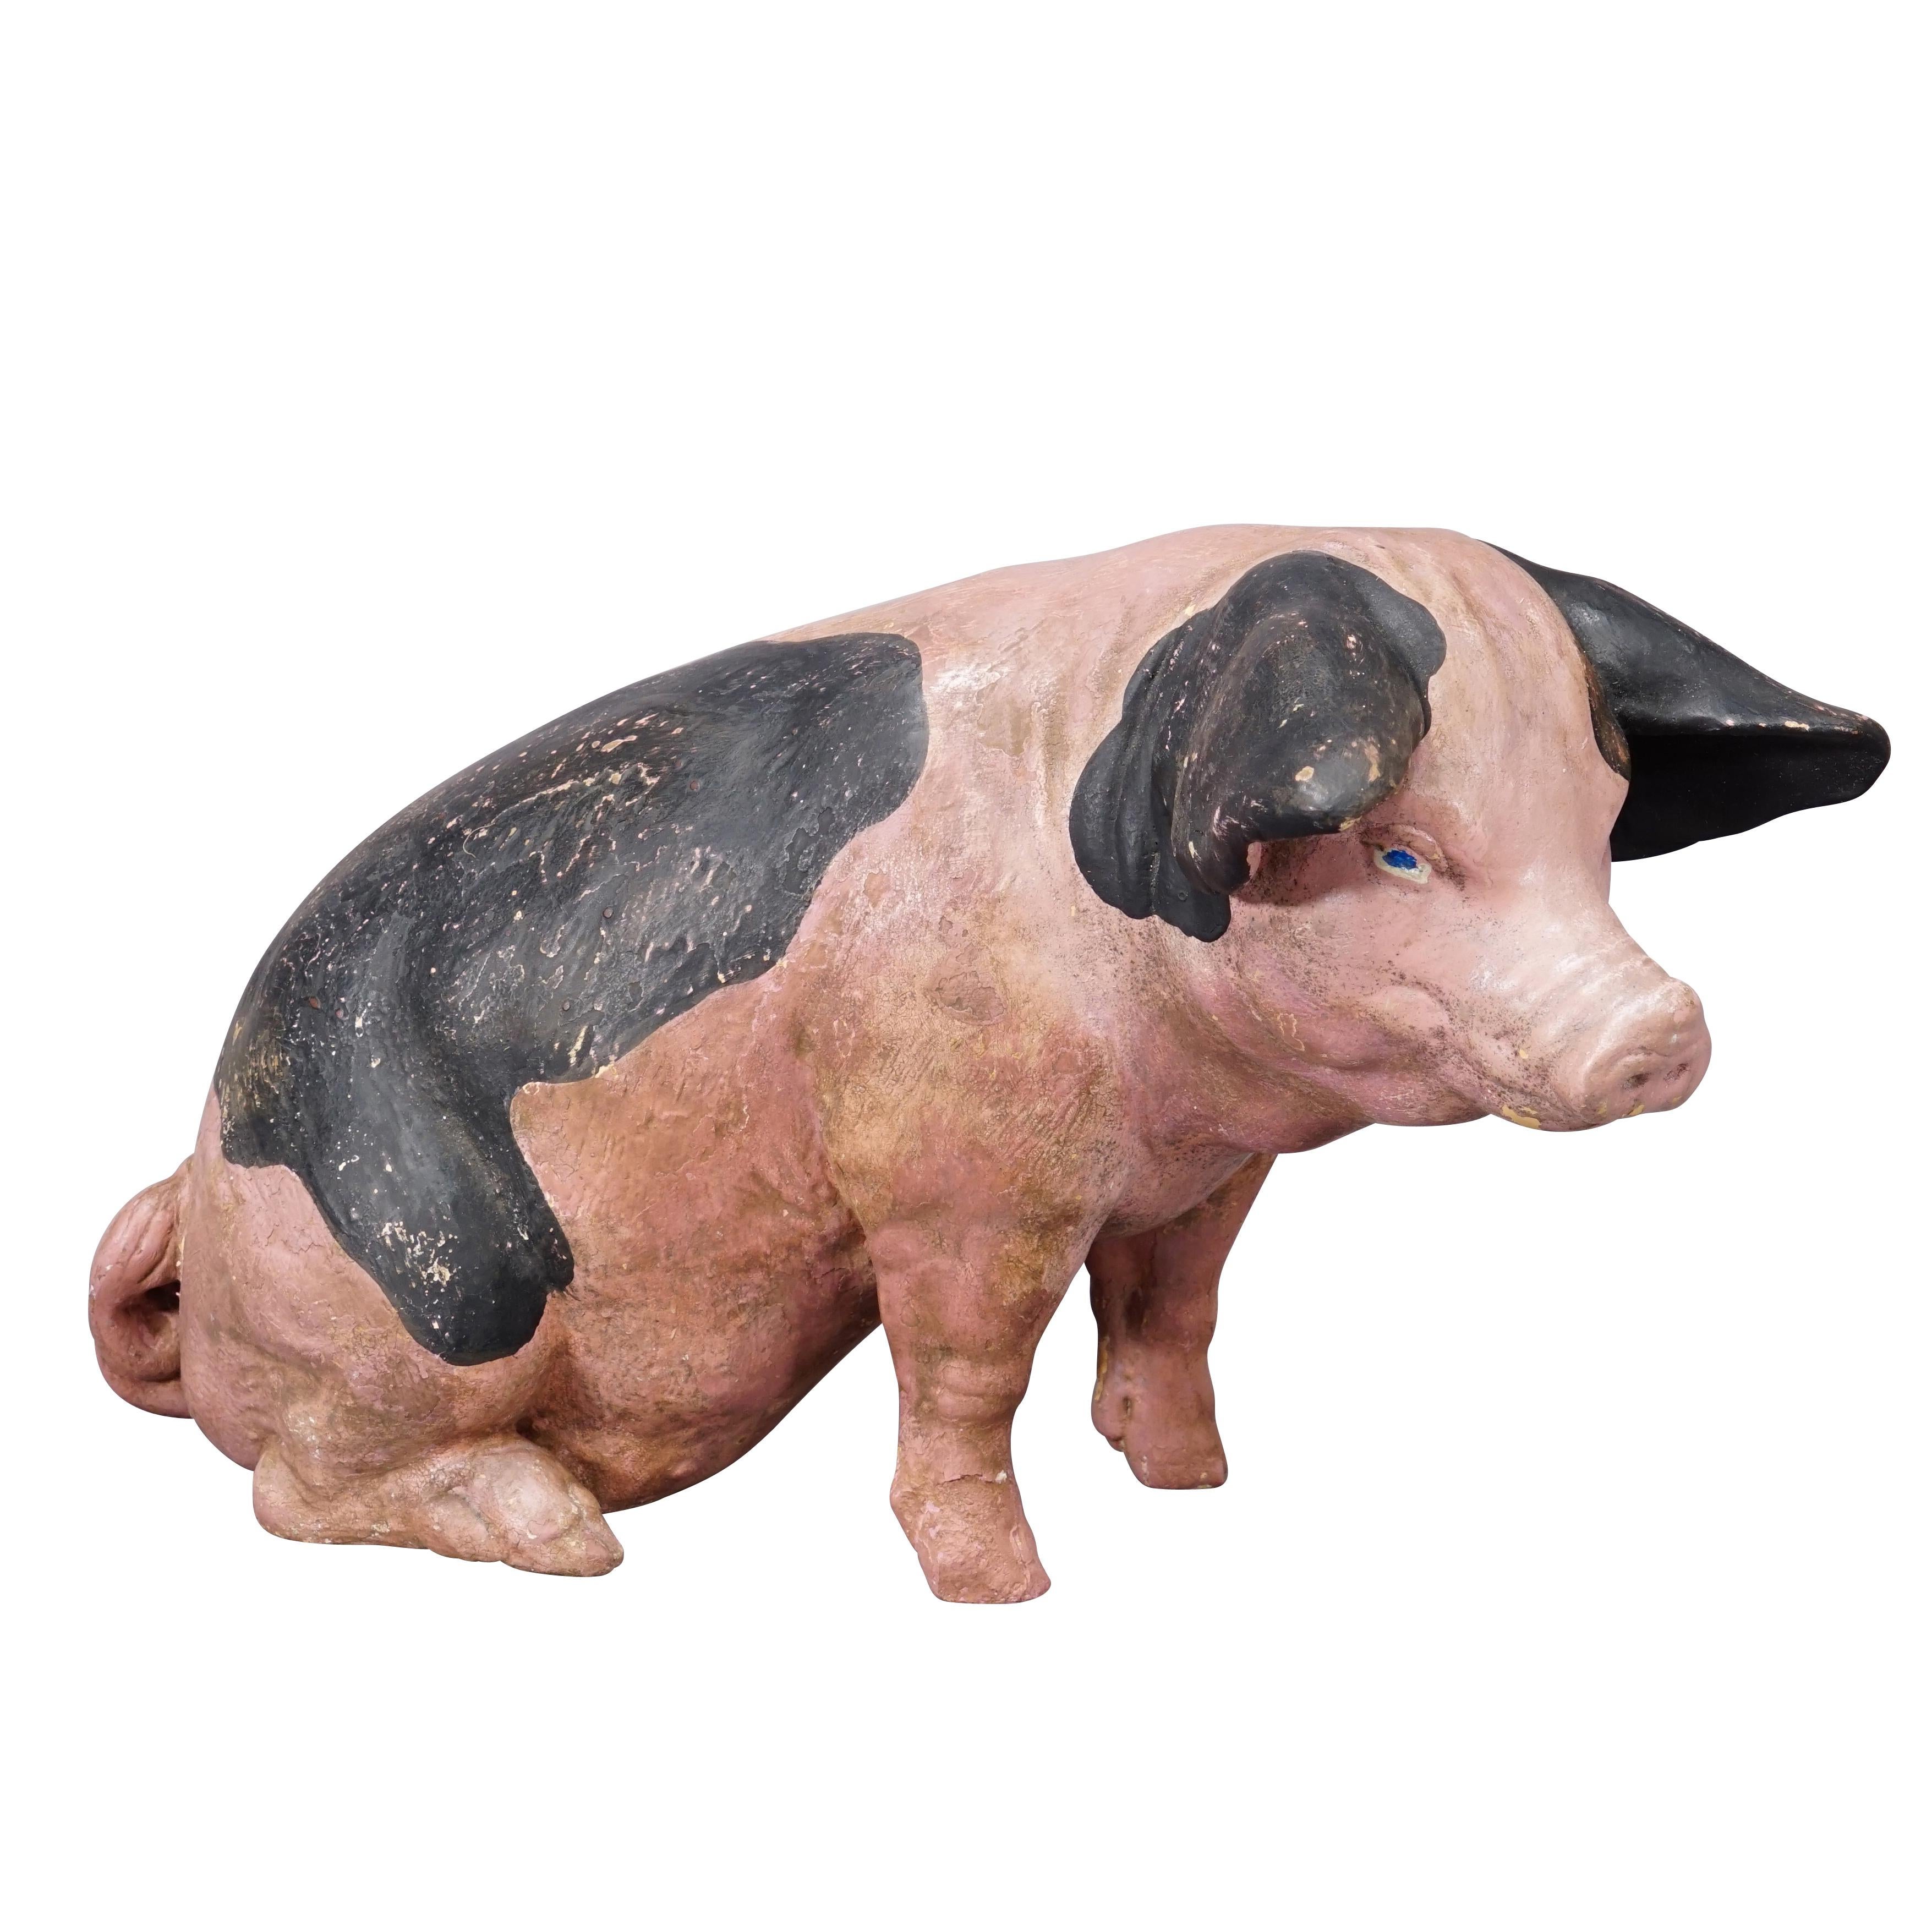 1930s Swabian Hallic Country Pig Made of Terracotta

A vintage statue of a Swabian hallic country pig. It was used as shop window decoration in a German butchery. The statue is made of teracotta and was manufactured most probably by Heissner around